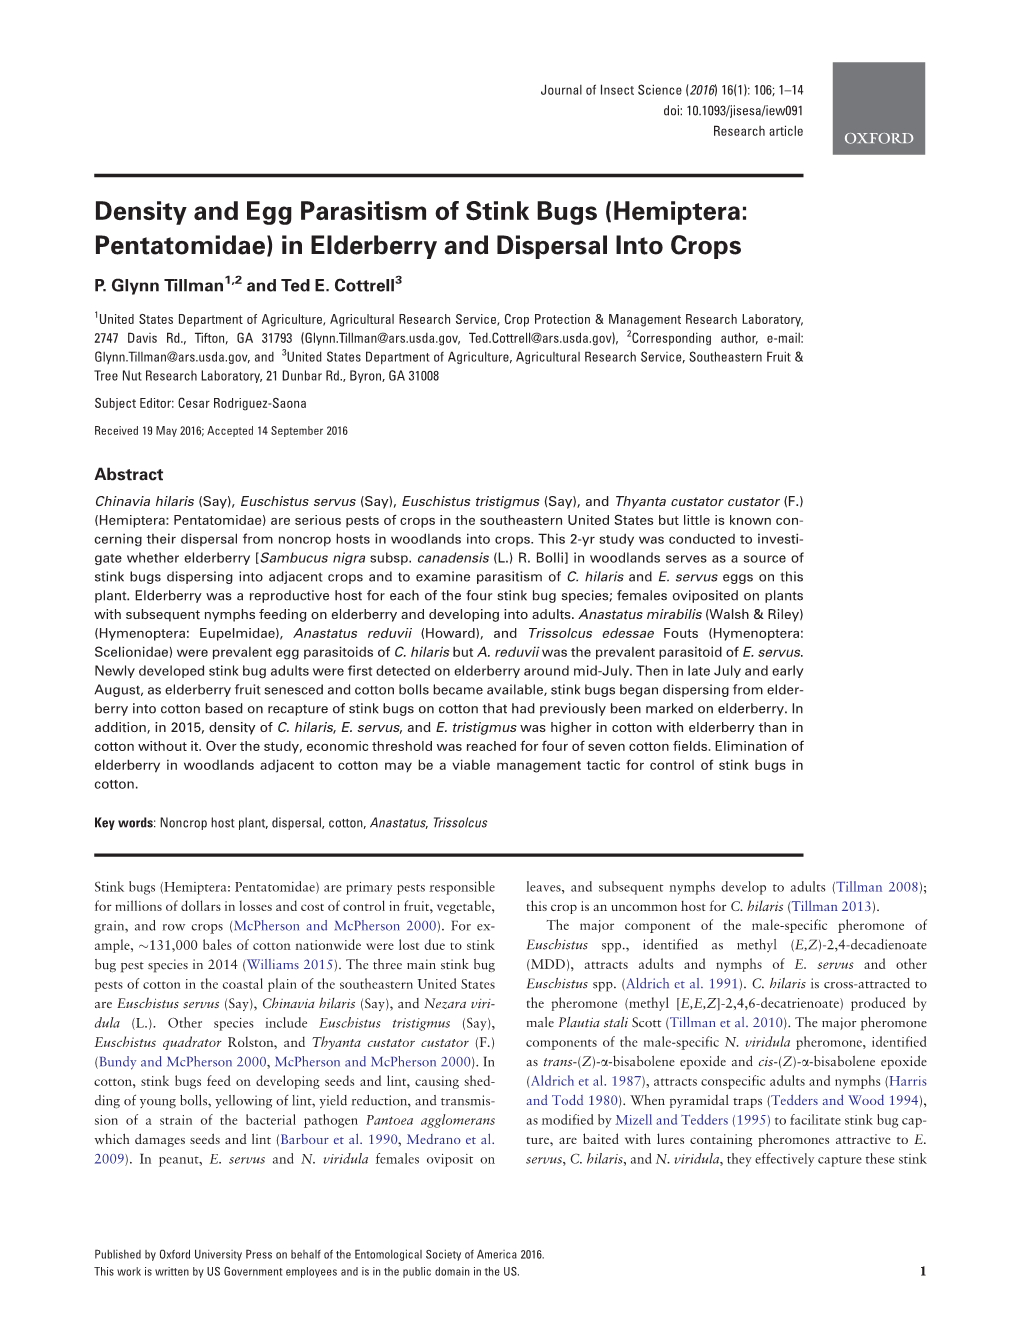 Density and Egg Parasitism of Stink Bugs (Hemiptera: Pentatomidae) in Elderberry and Dispersal Into Crops